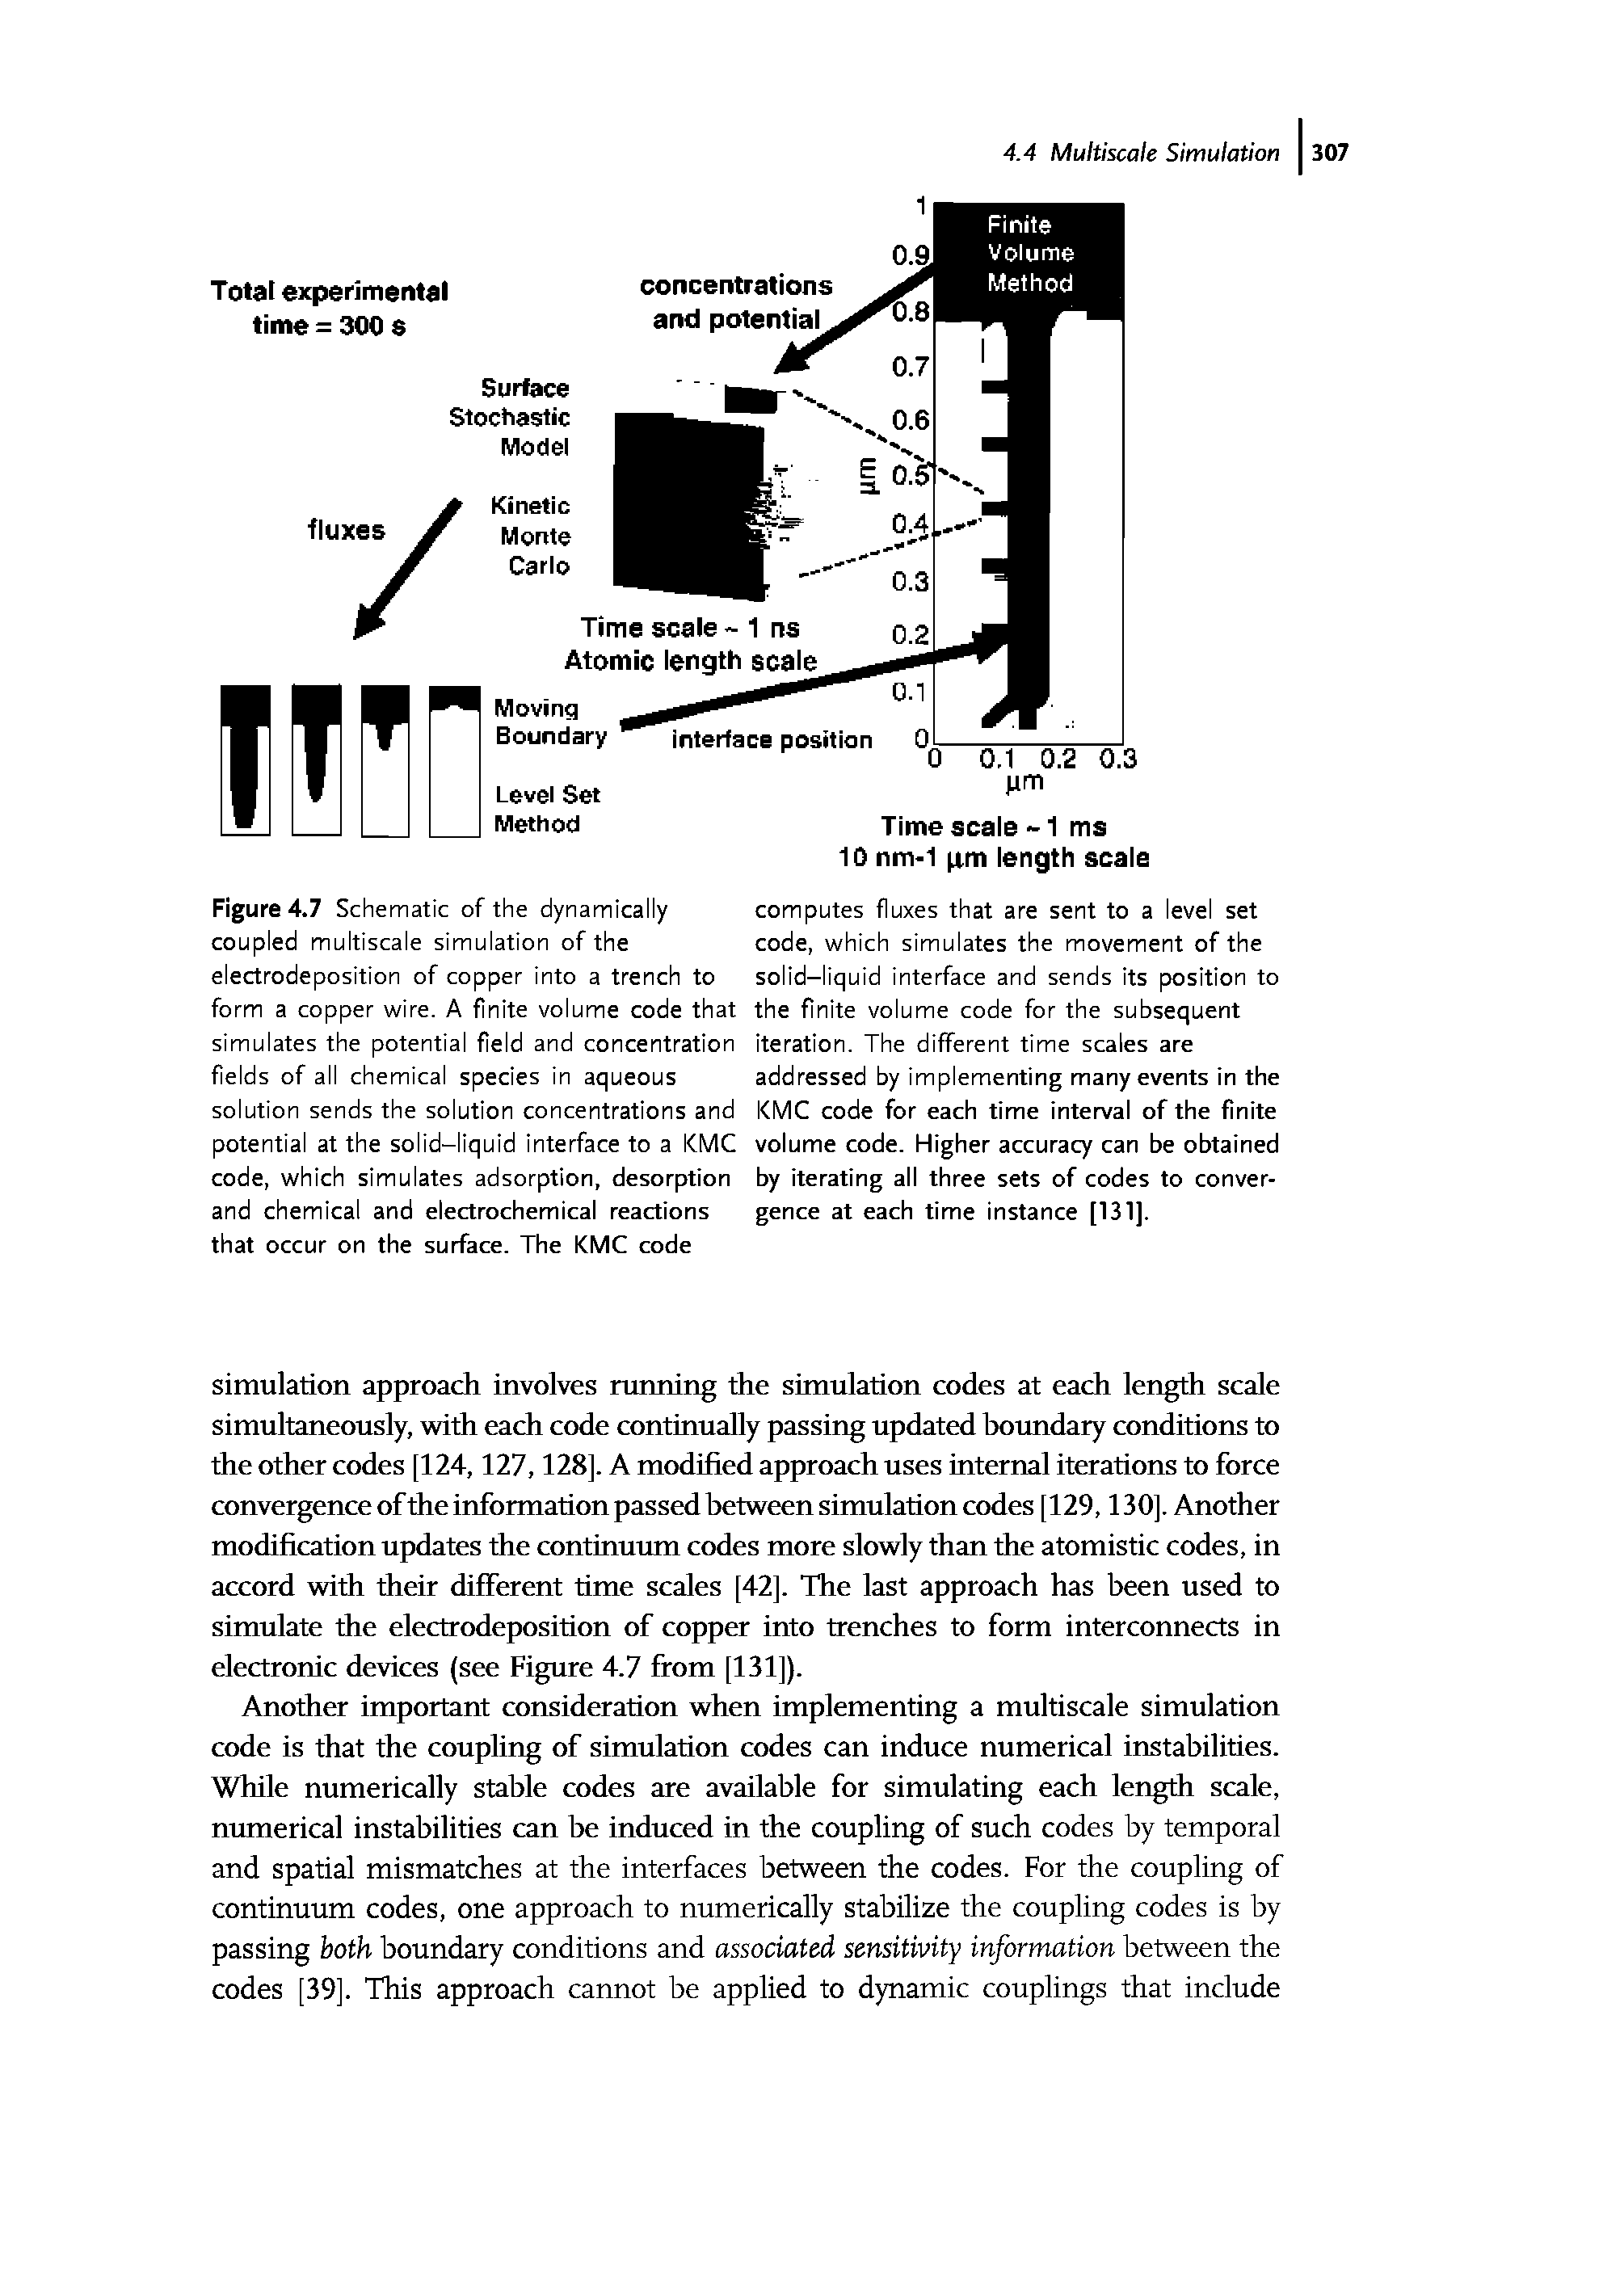 Figure 4.7 Schematic of the dynamically coupled multiscale simulation of the electrodeposition of copper into a trench to form a copper wire. A finite volume code that simulates the potential field and concentration fields of all chemical species in aqueous solution sends the solution concentrations and potential at the solid-liquid interface to a KMC code, which simulates adsorption, desorption and chemical and electrochemical reactions that occur on the surface. The KMC code...